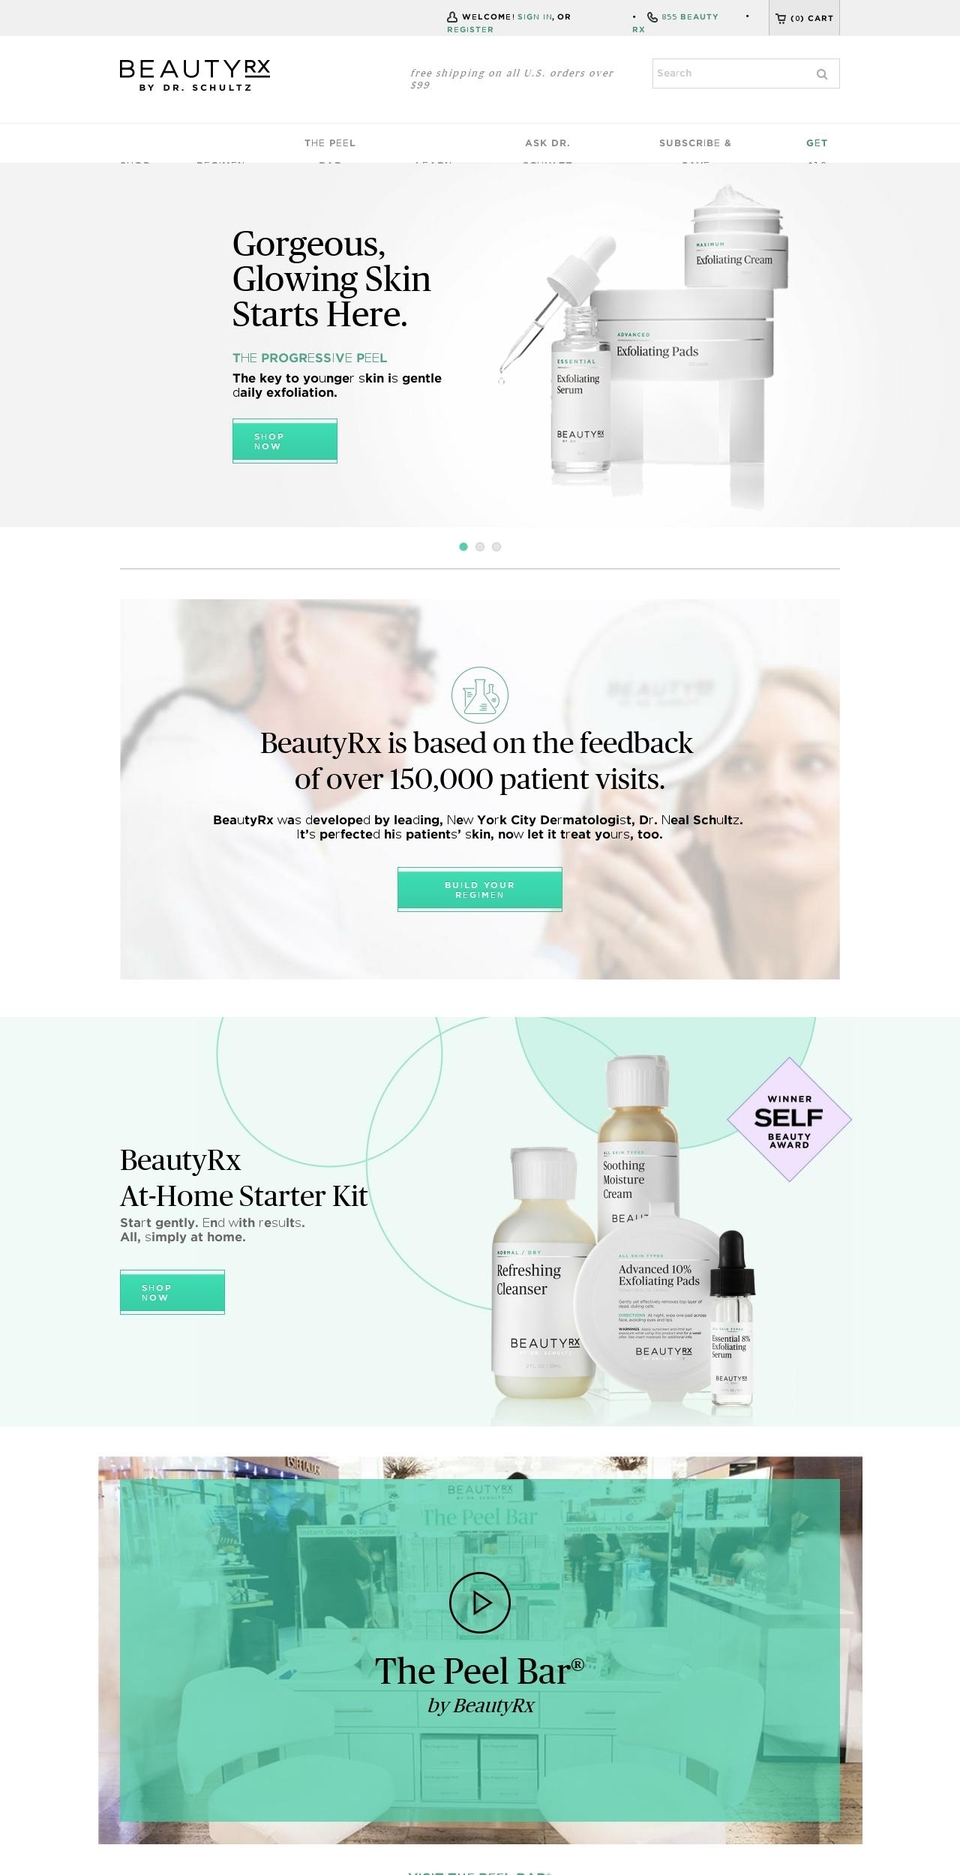 [Mob-20-Feb-18] Beauty RX [BR-248] Shopify theme site example itsnotjustaboutwrinkles.com